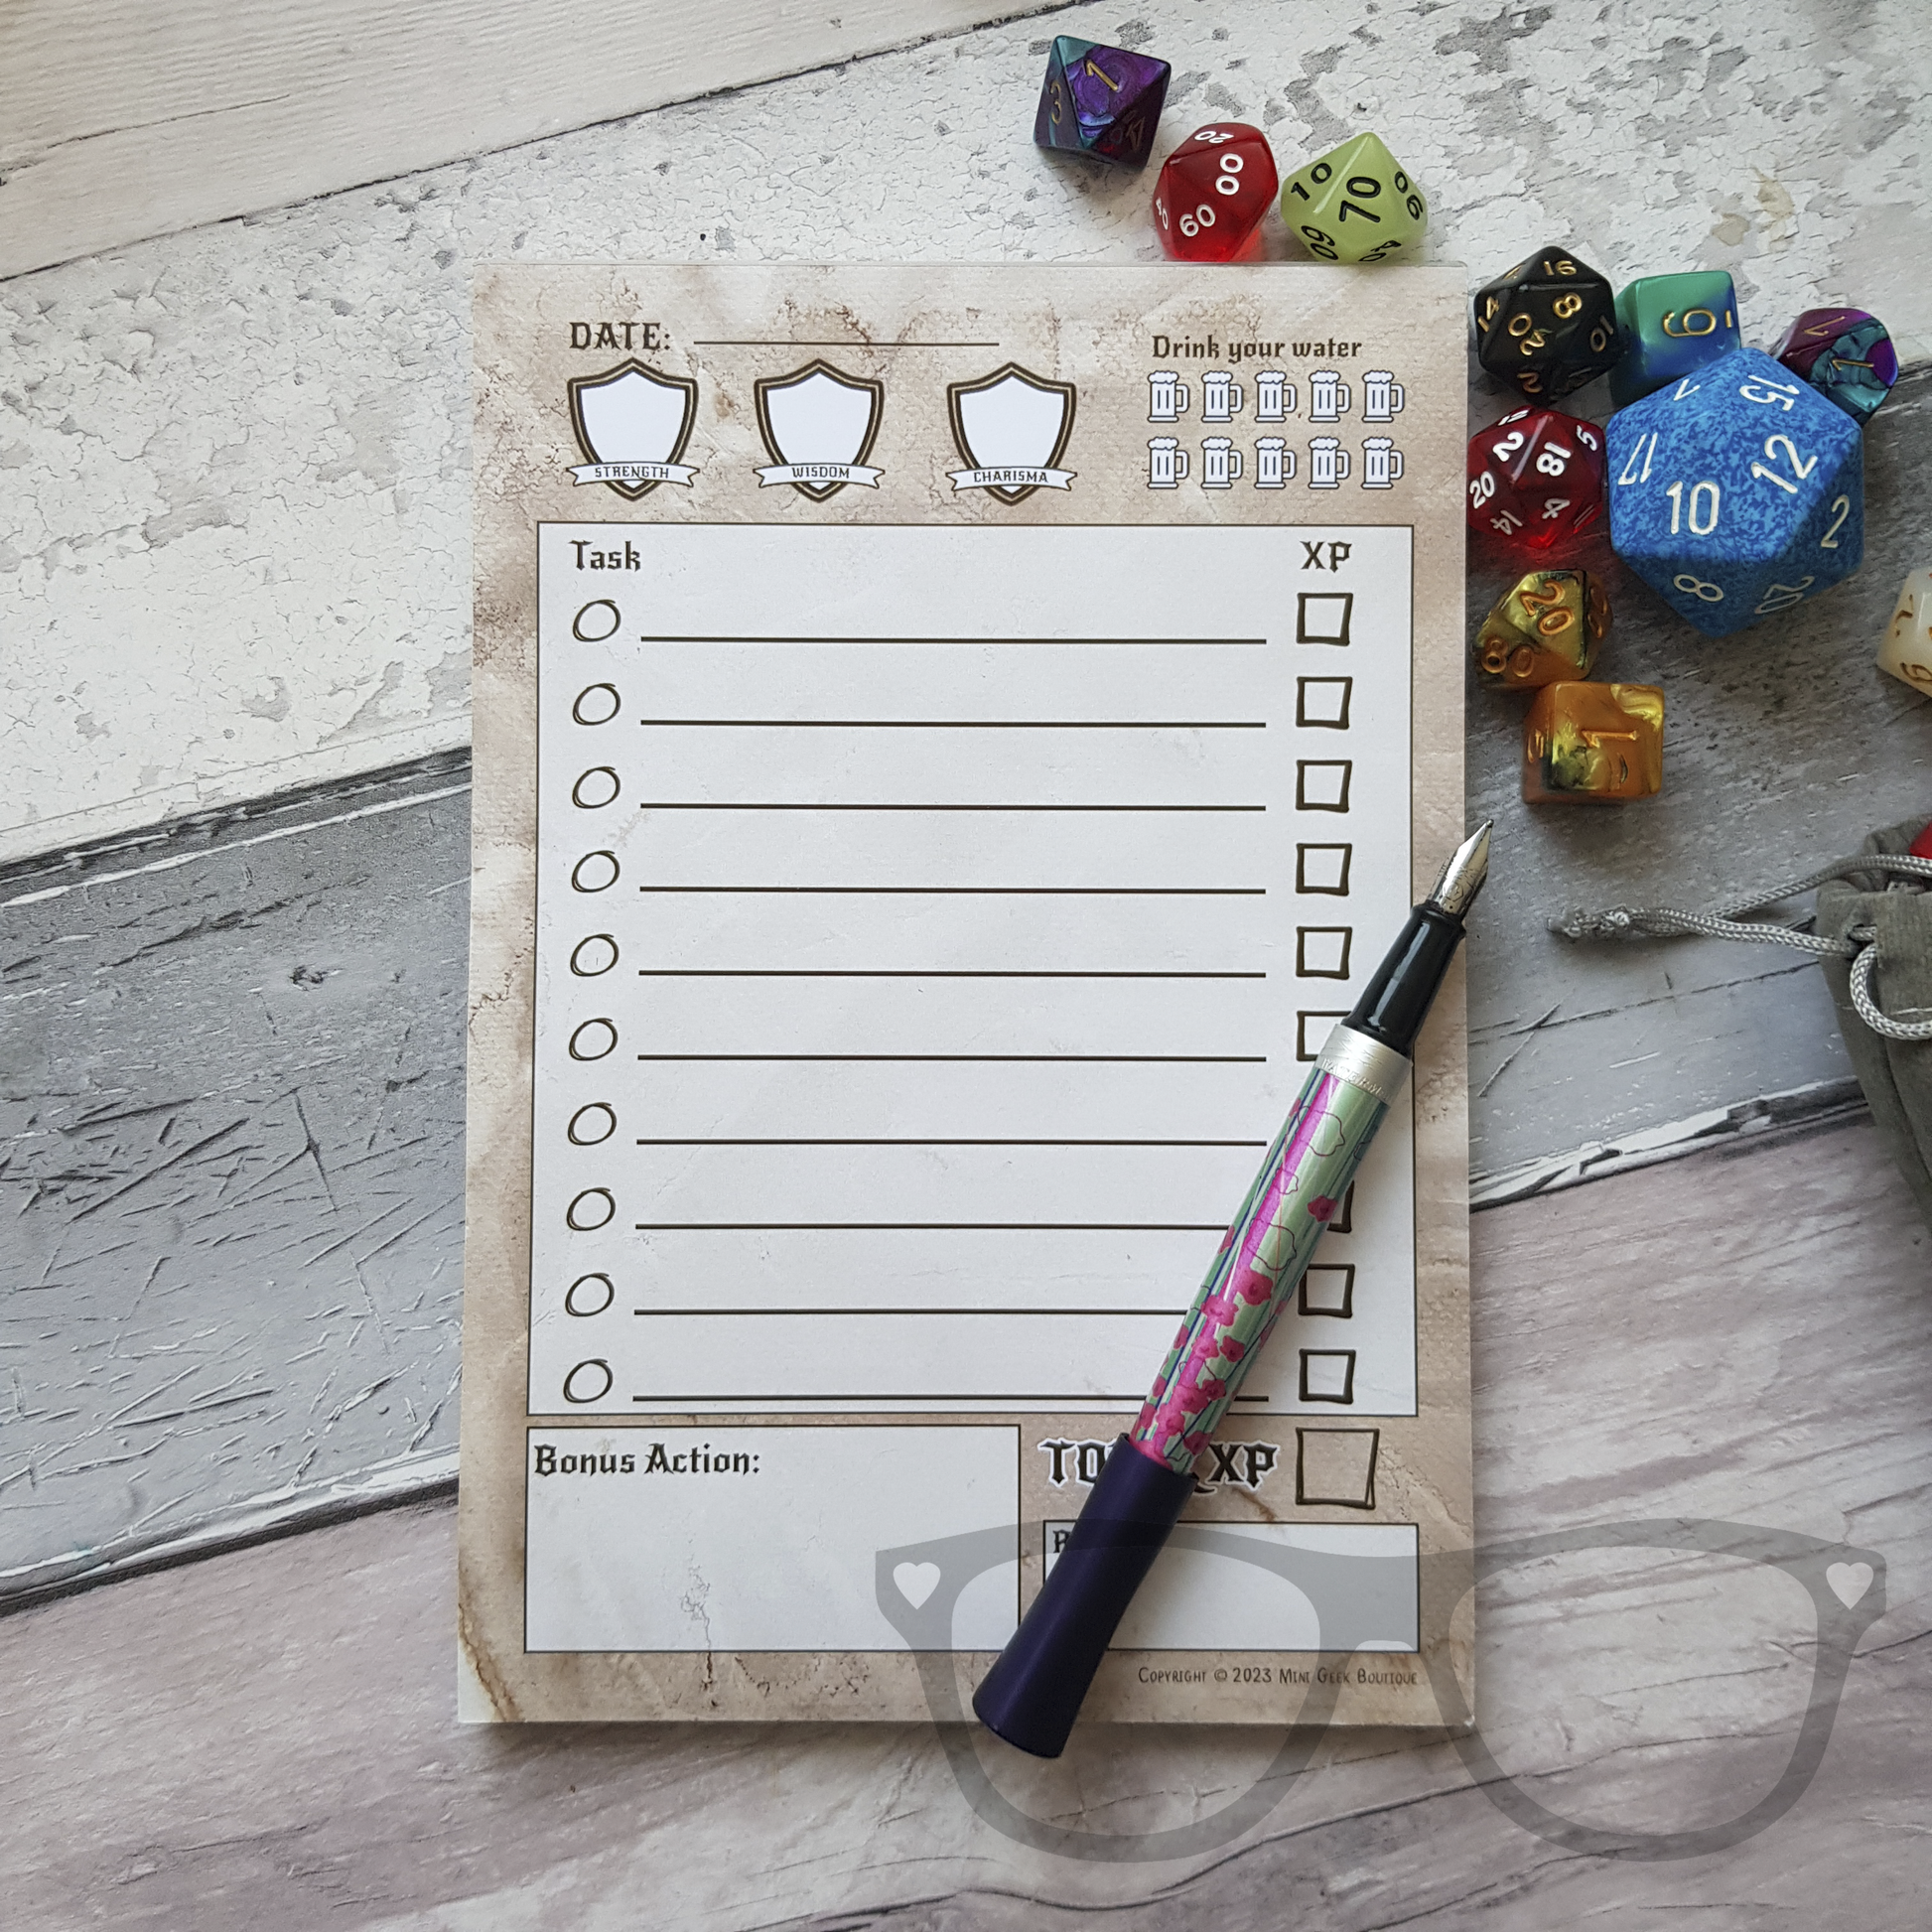 A5 To do list with drinks tracker shown pen and dice